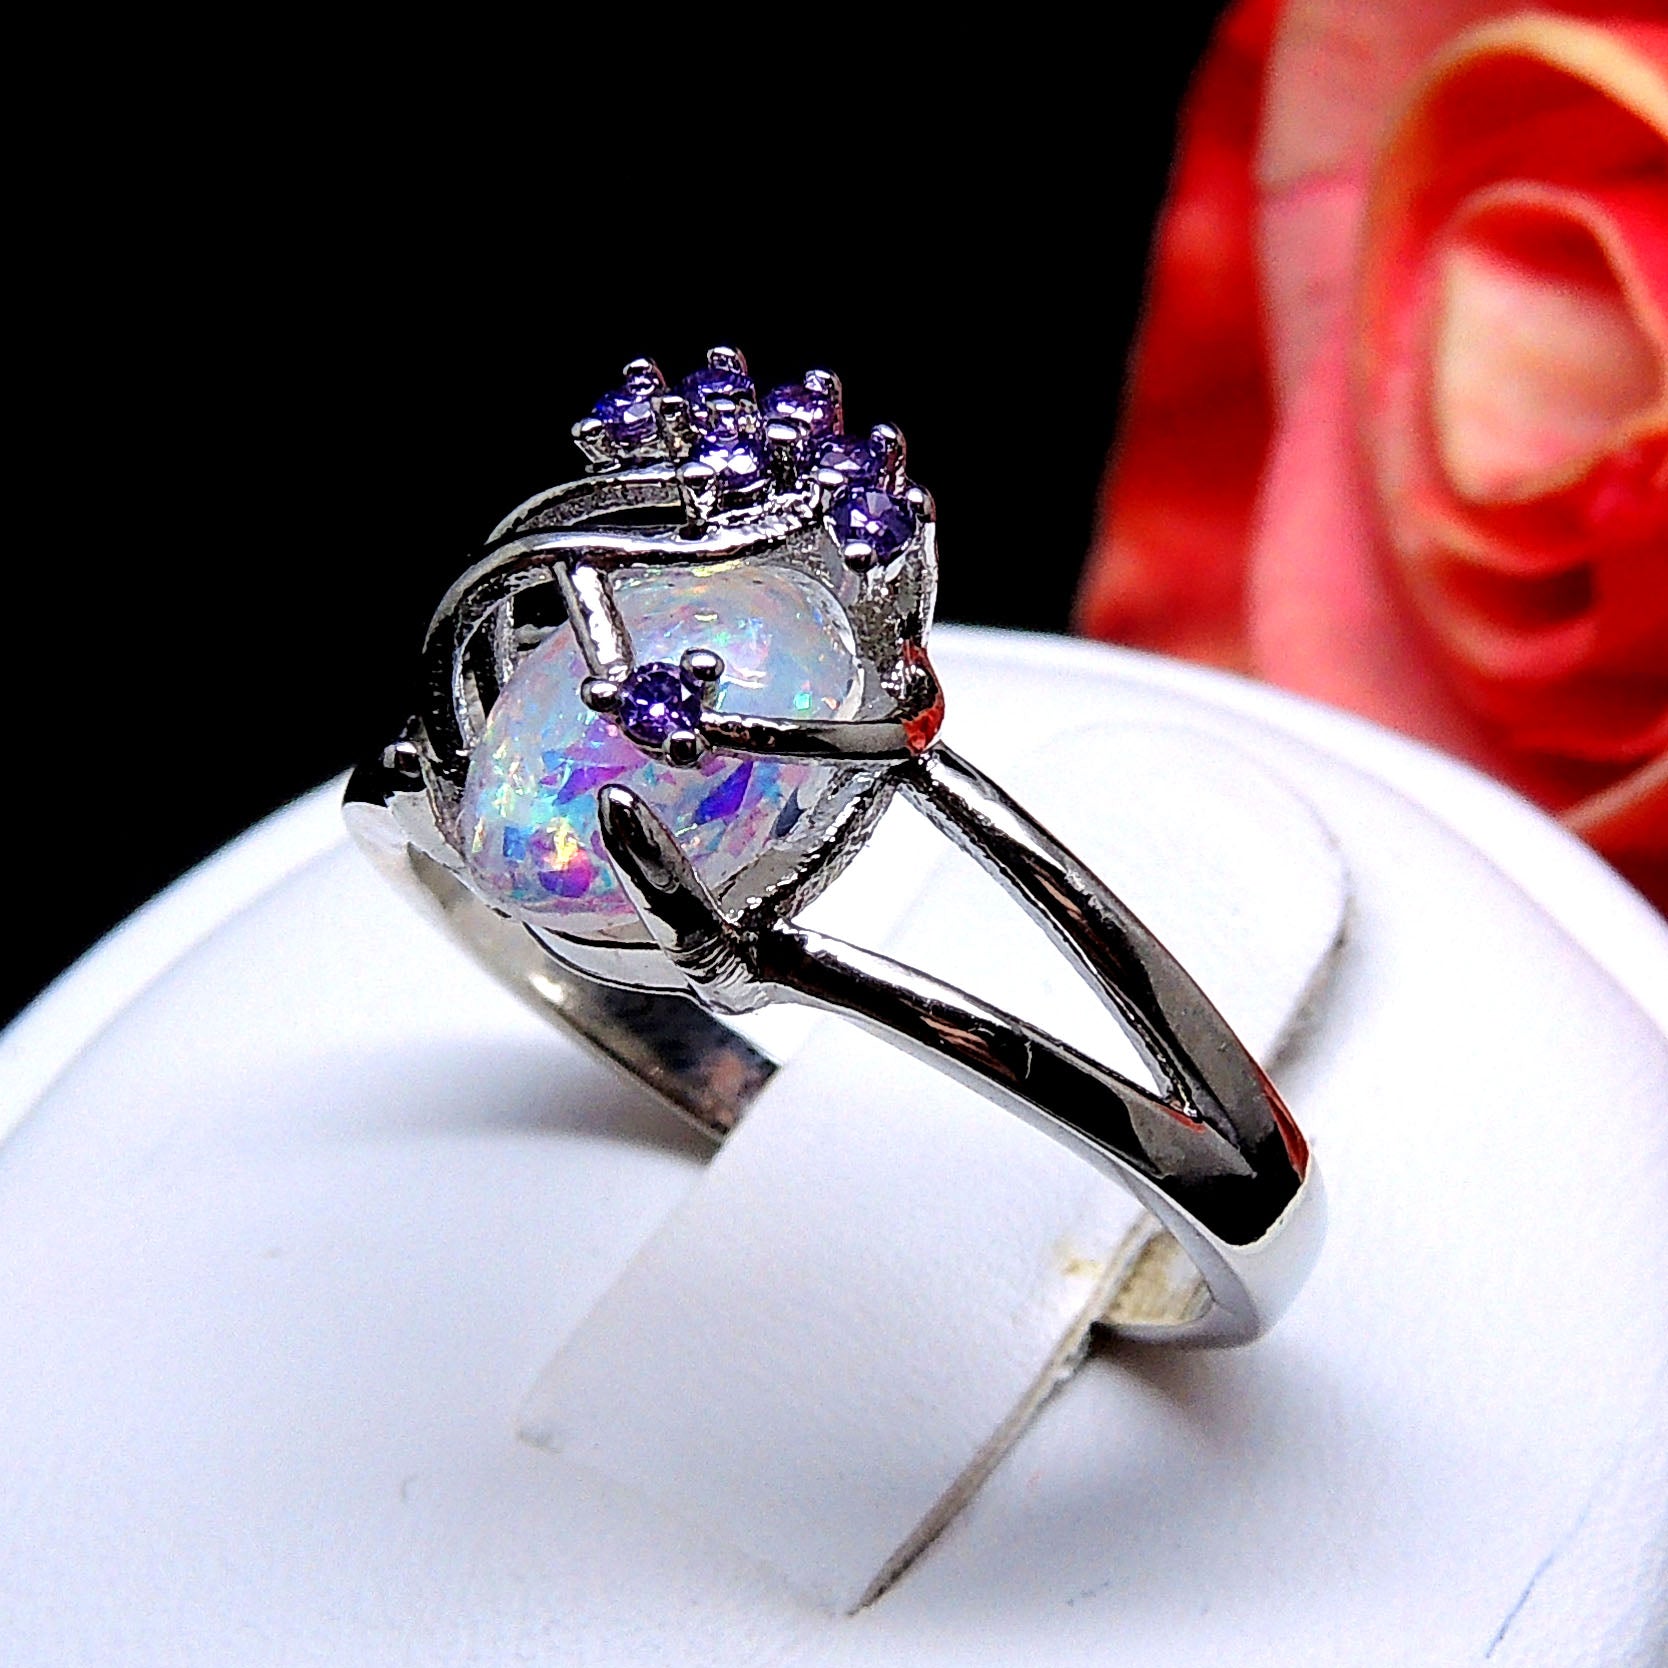 Adlai Simulated Fire Opal Ring Women Purple Cubic Zirconia Ginger Lyne - 10